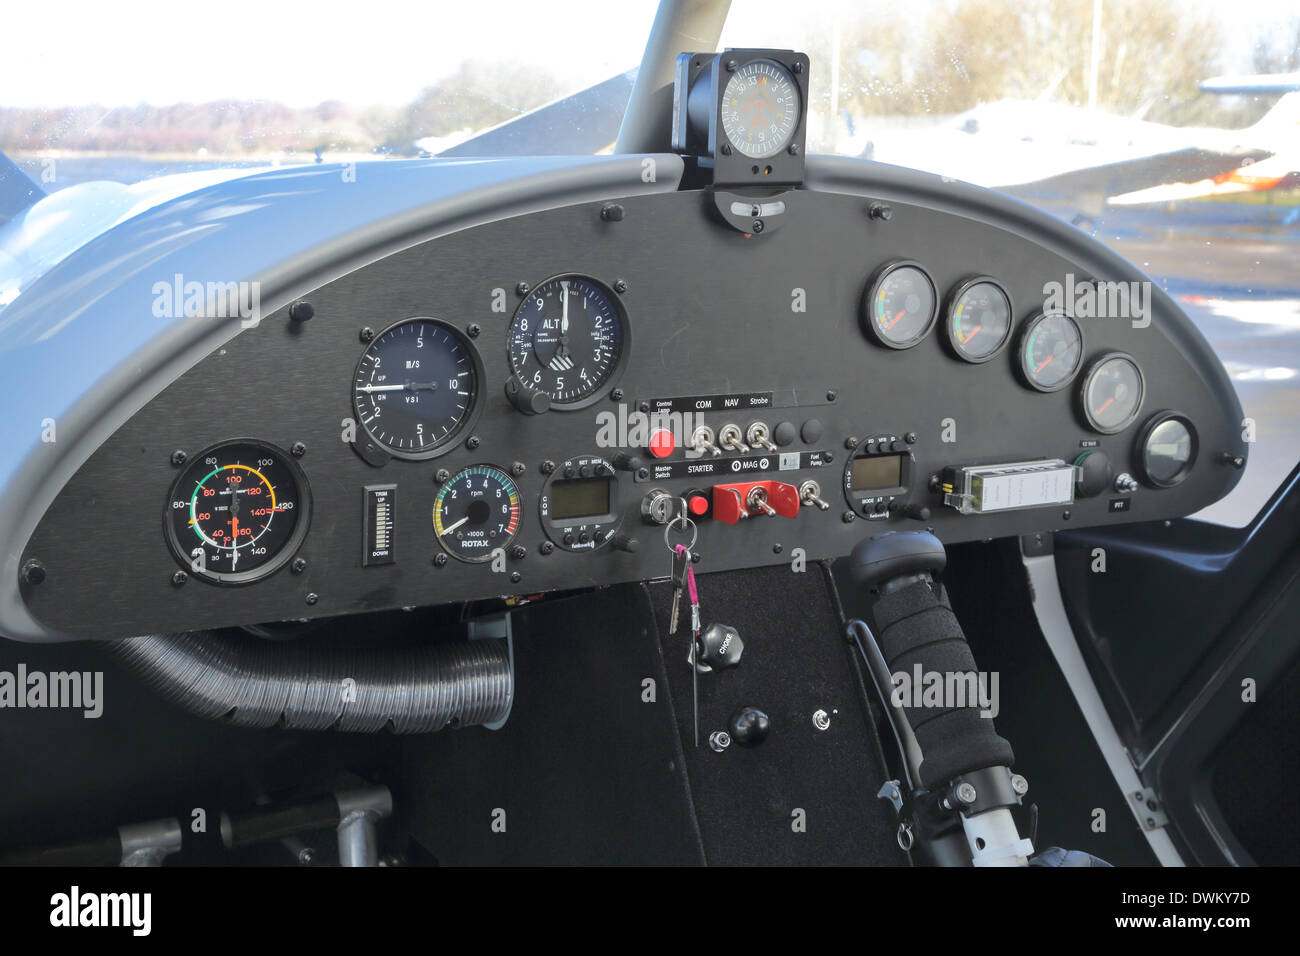 In the cockpit of the C42 